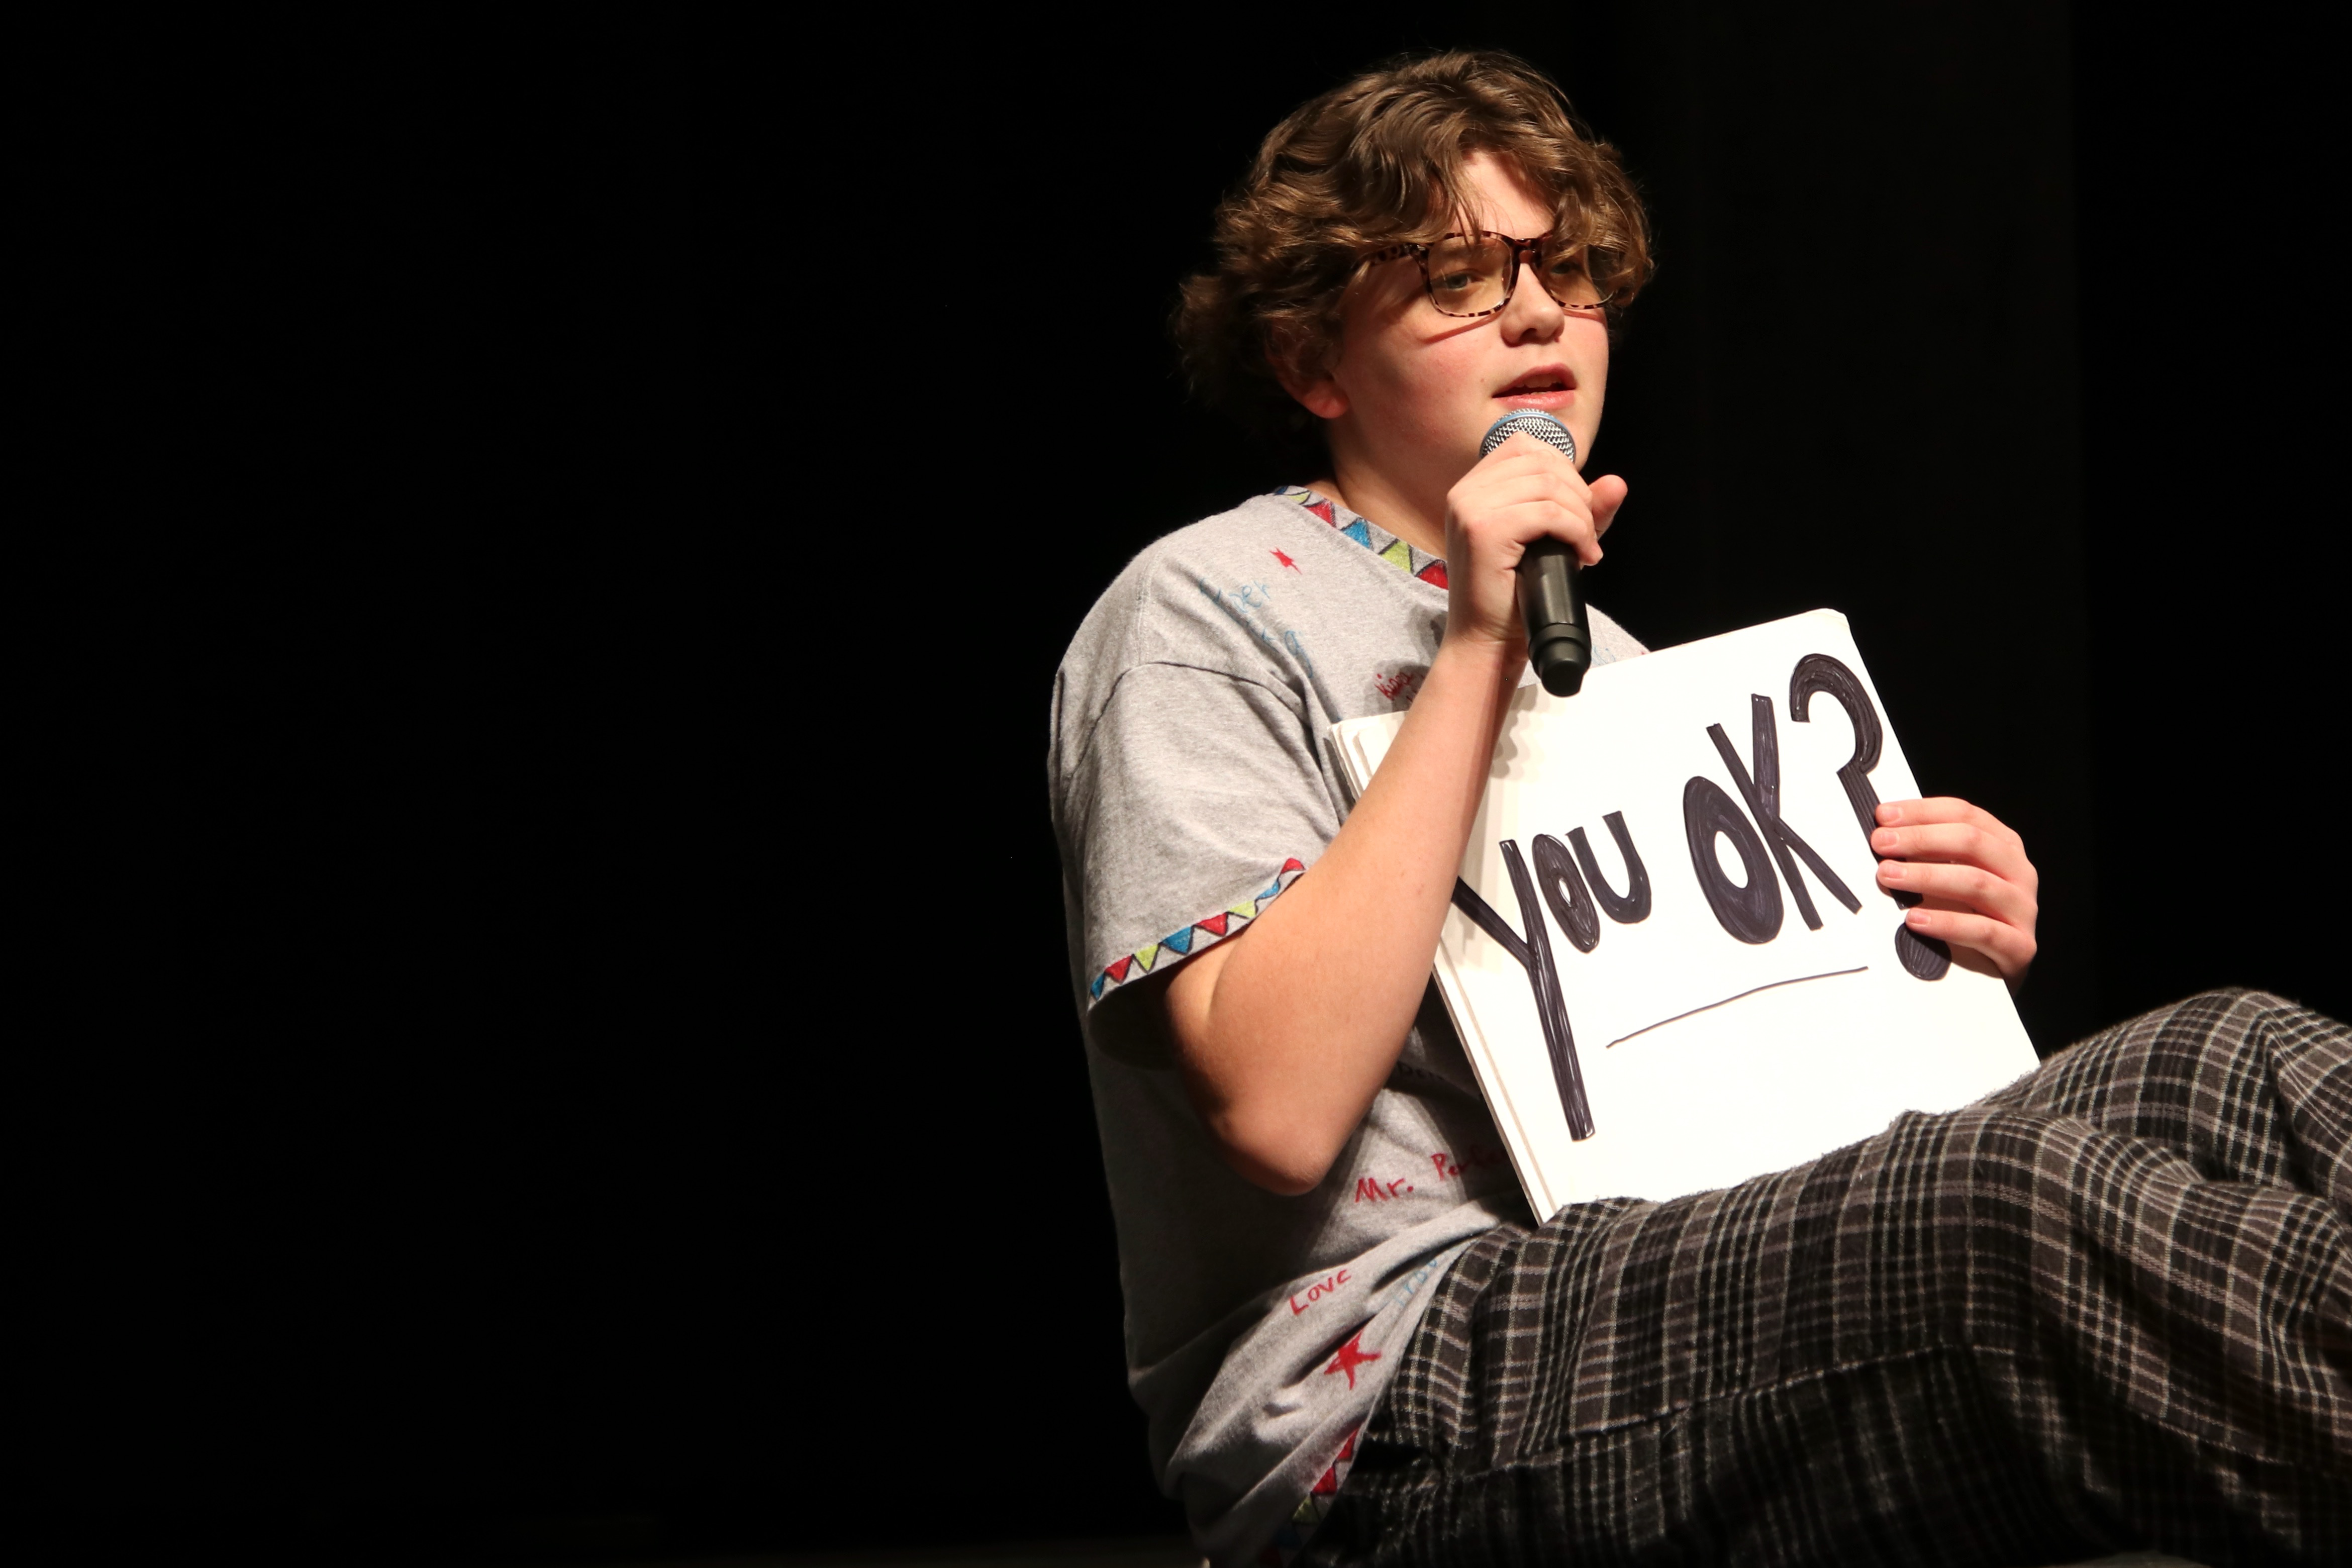 A teenage boy on a school stage with a microphone holds a sign that says "You okay?"